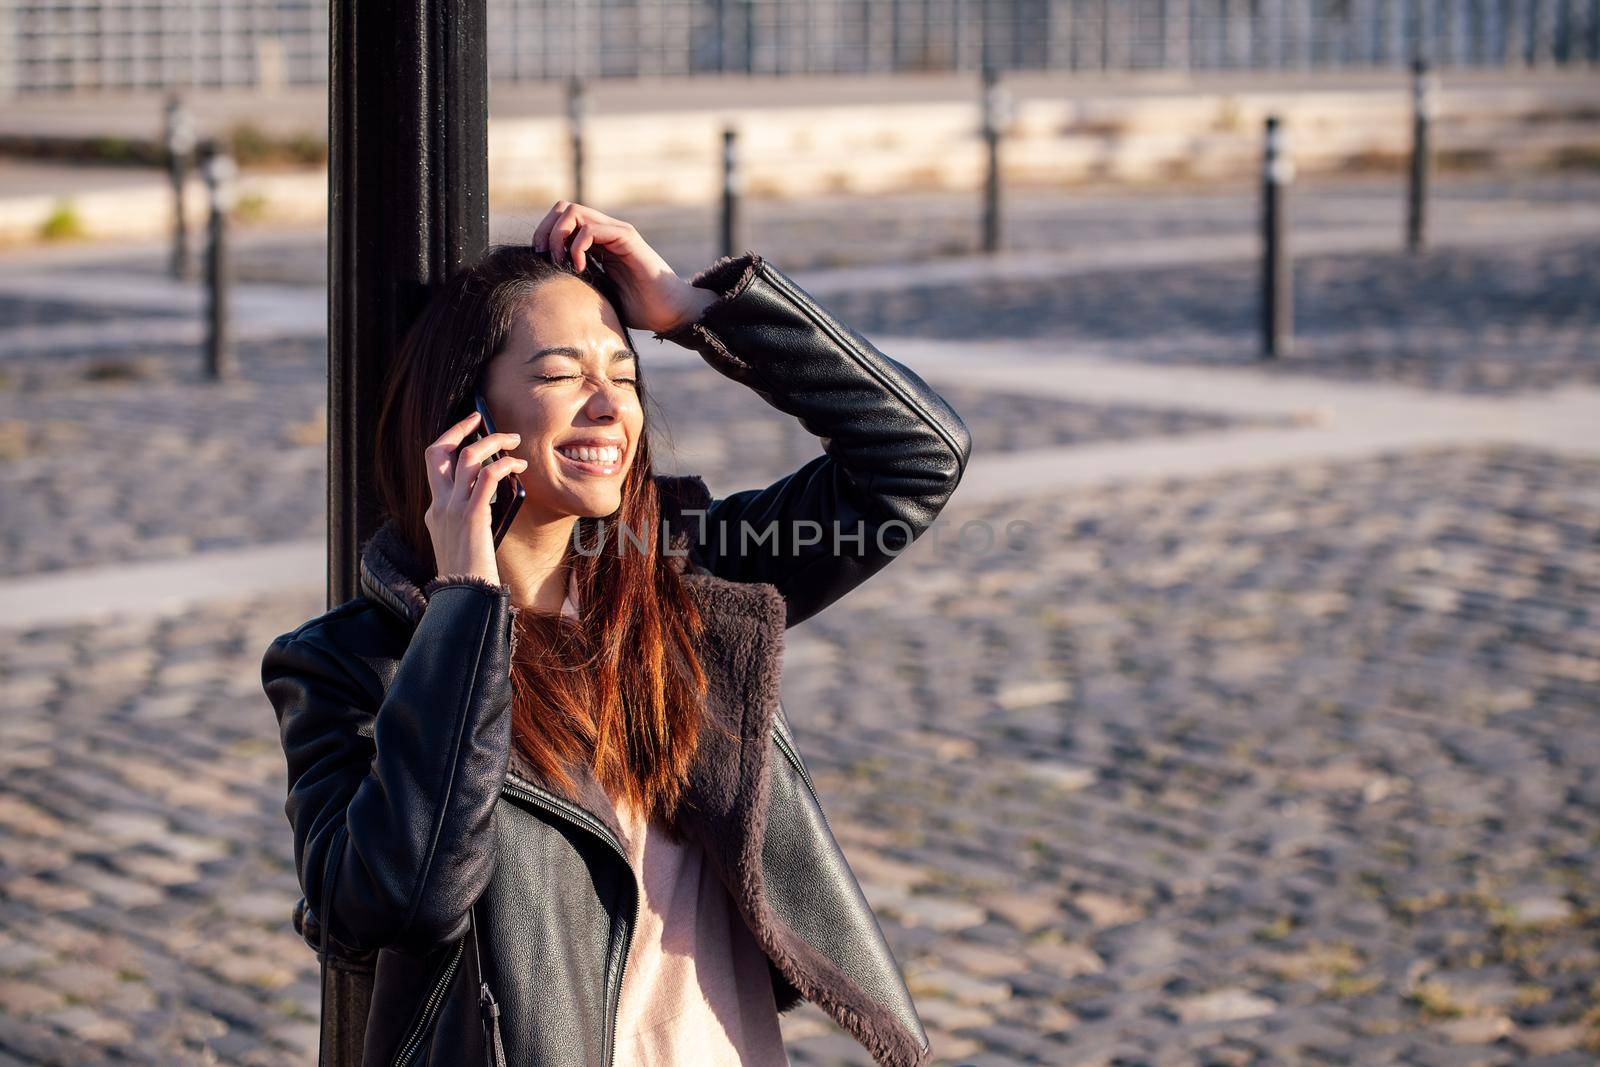 young woman laughing and talking on the phone leaning against a lamppost, concept of technology and urban lifestyle, copyspace for text